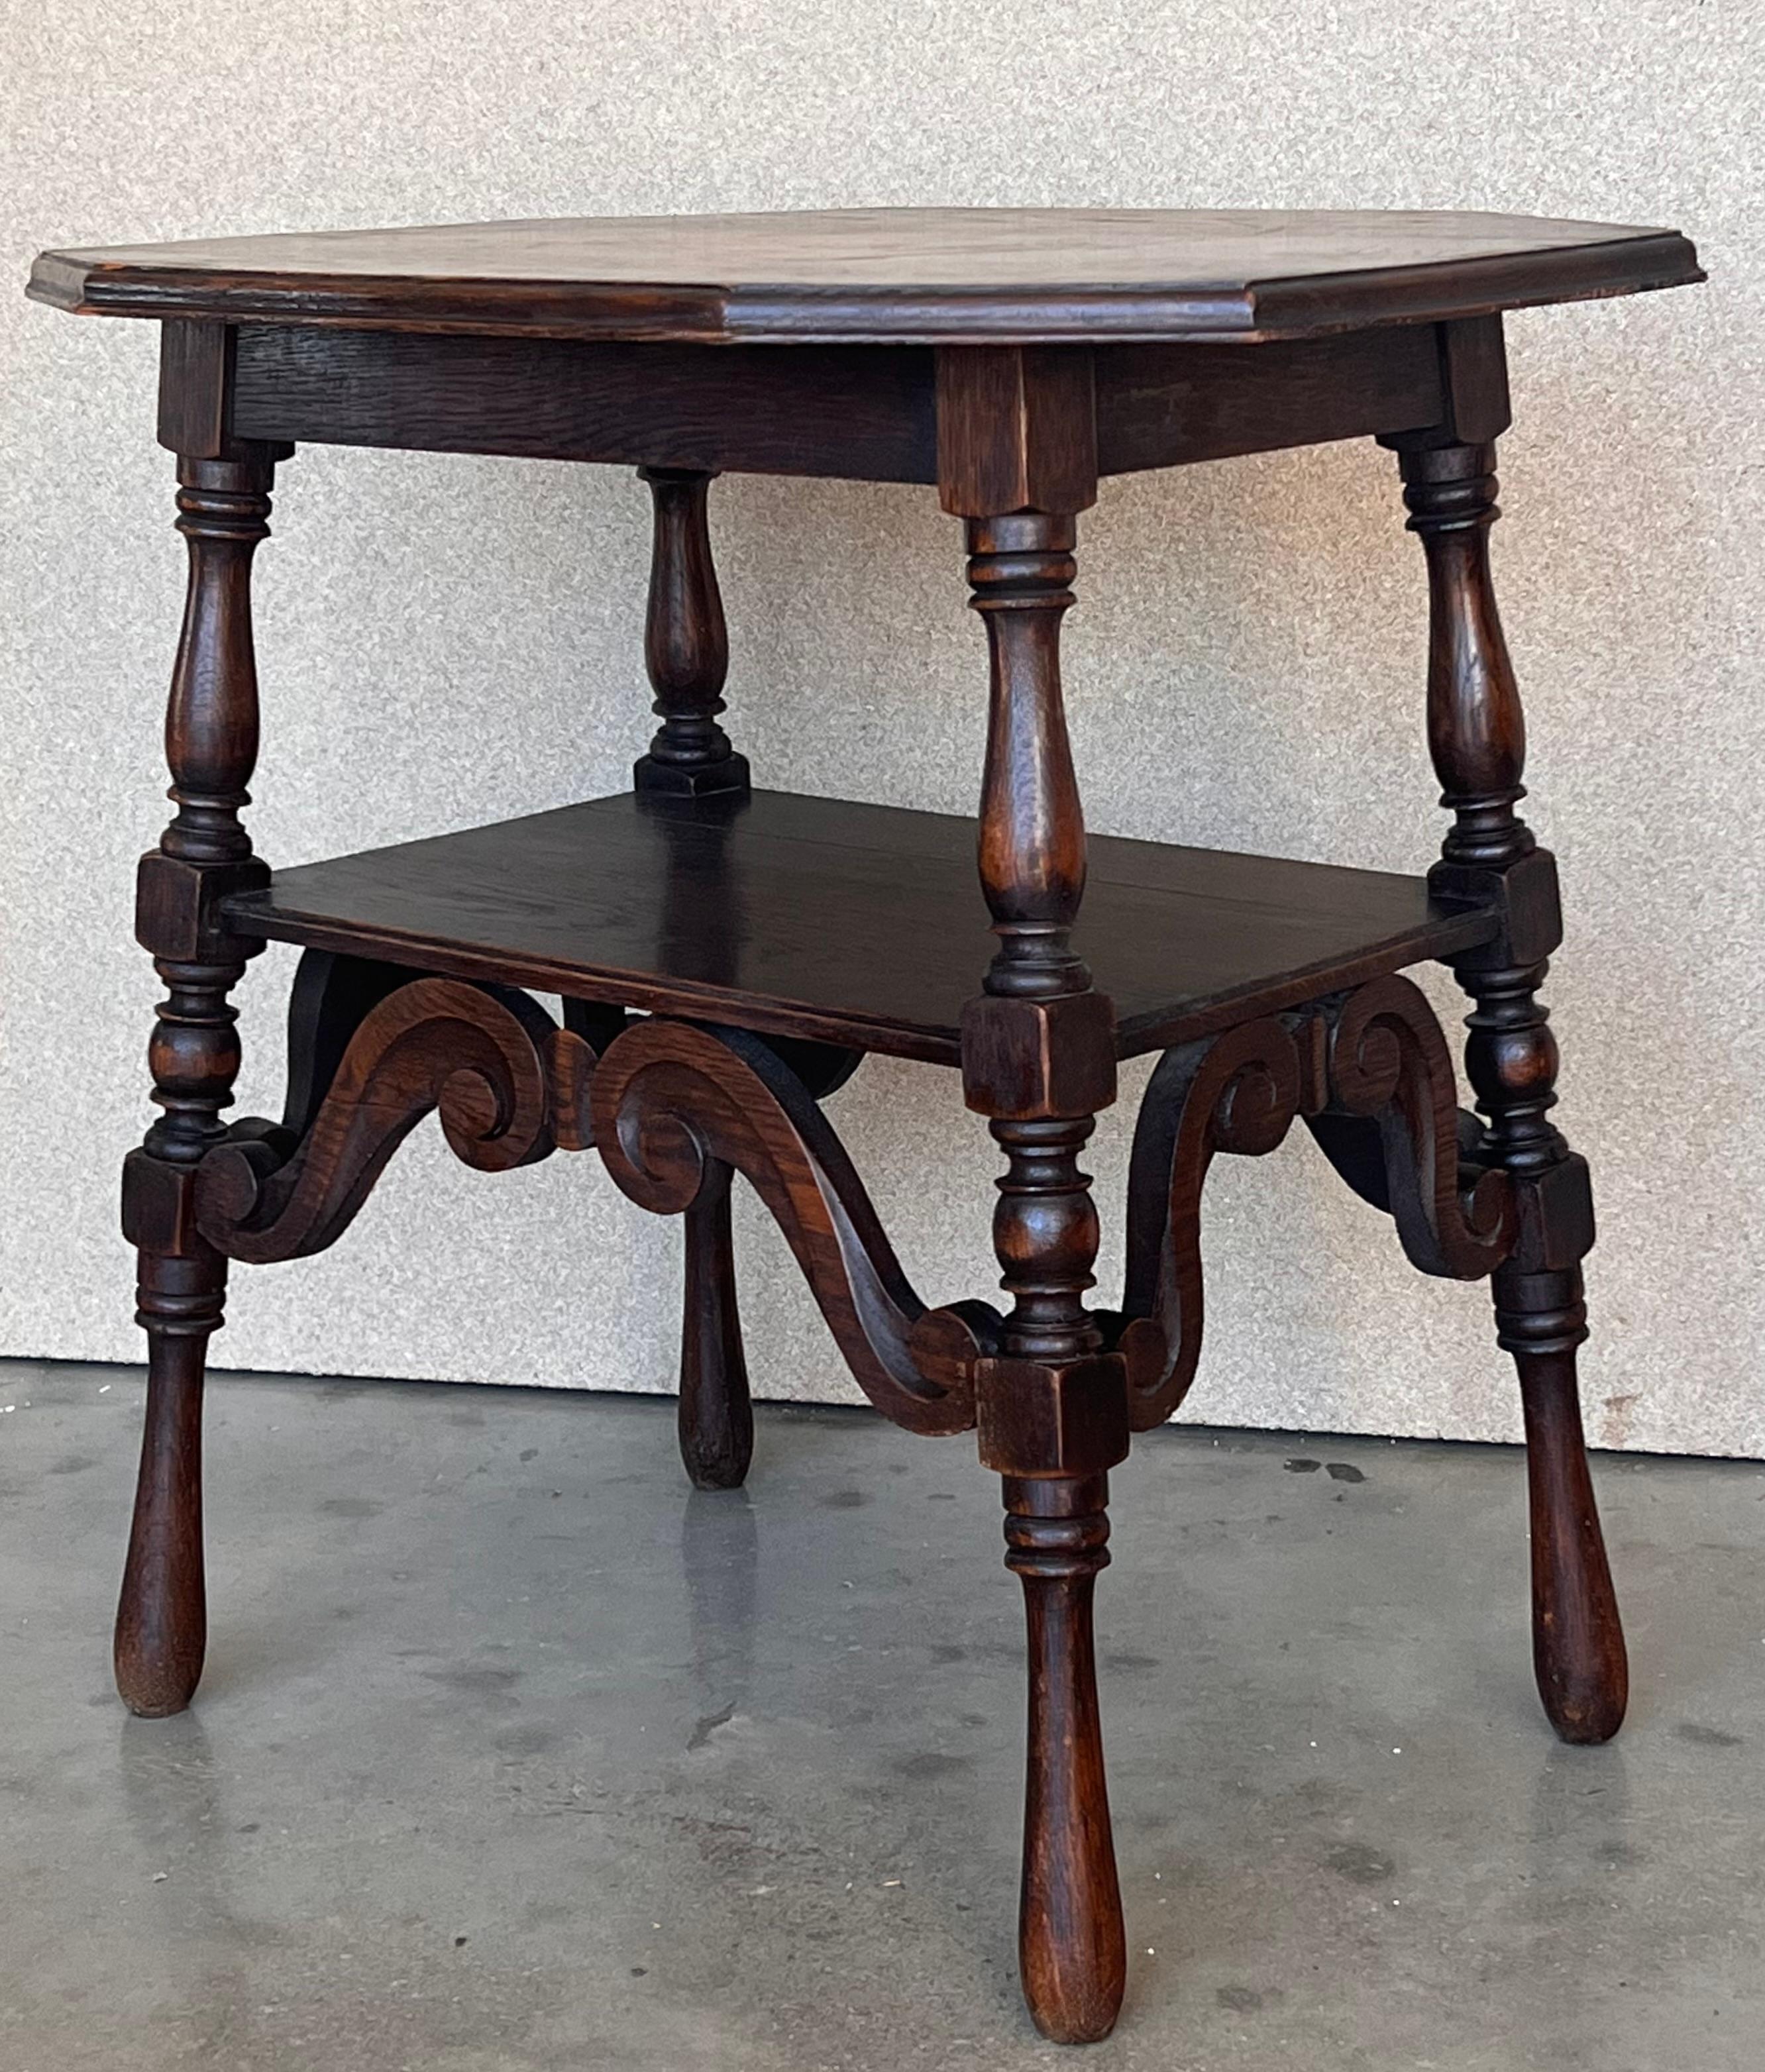 20th Century Spanish Two-Tier Walnut Console Side Table with Carved Legs and Stretcher For Sale